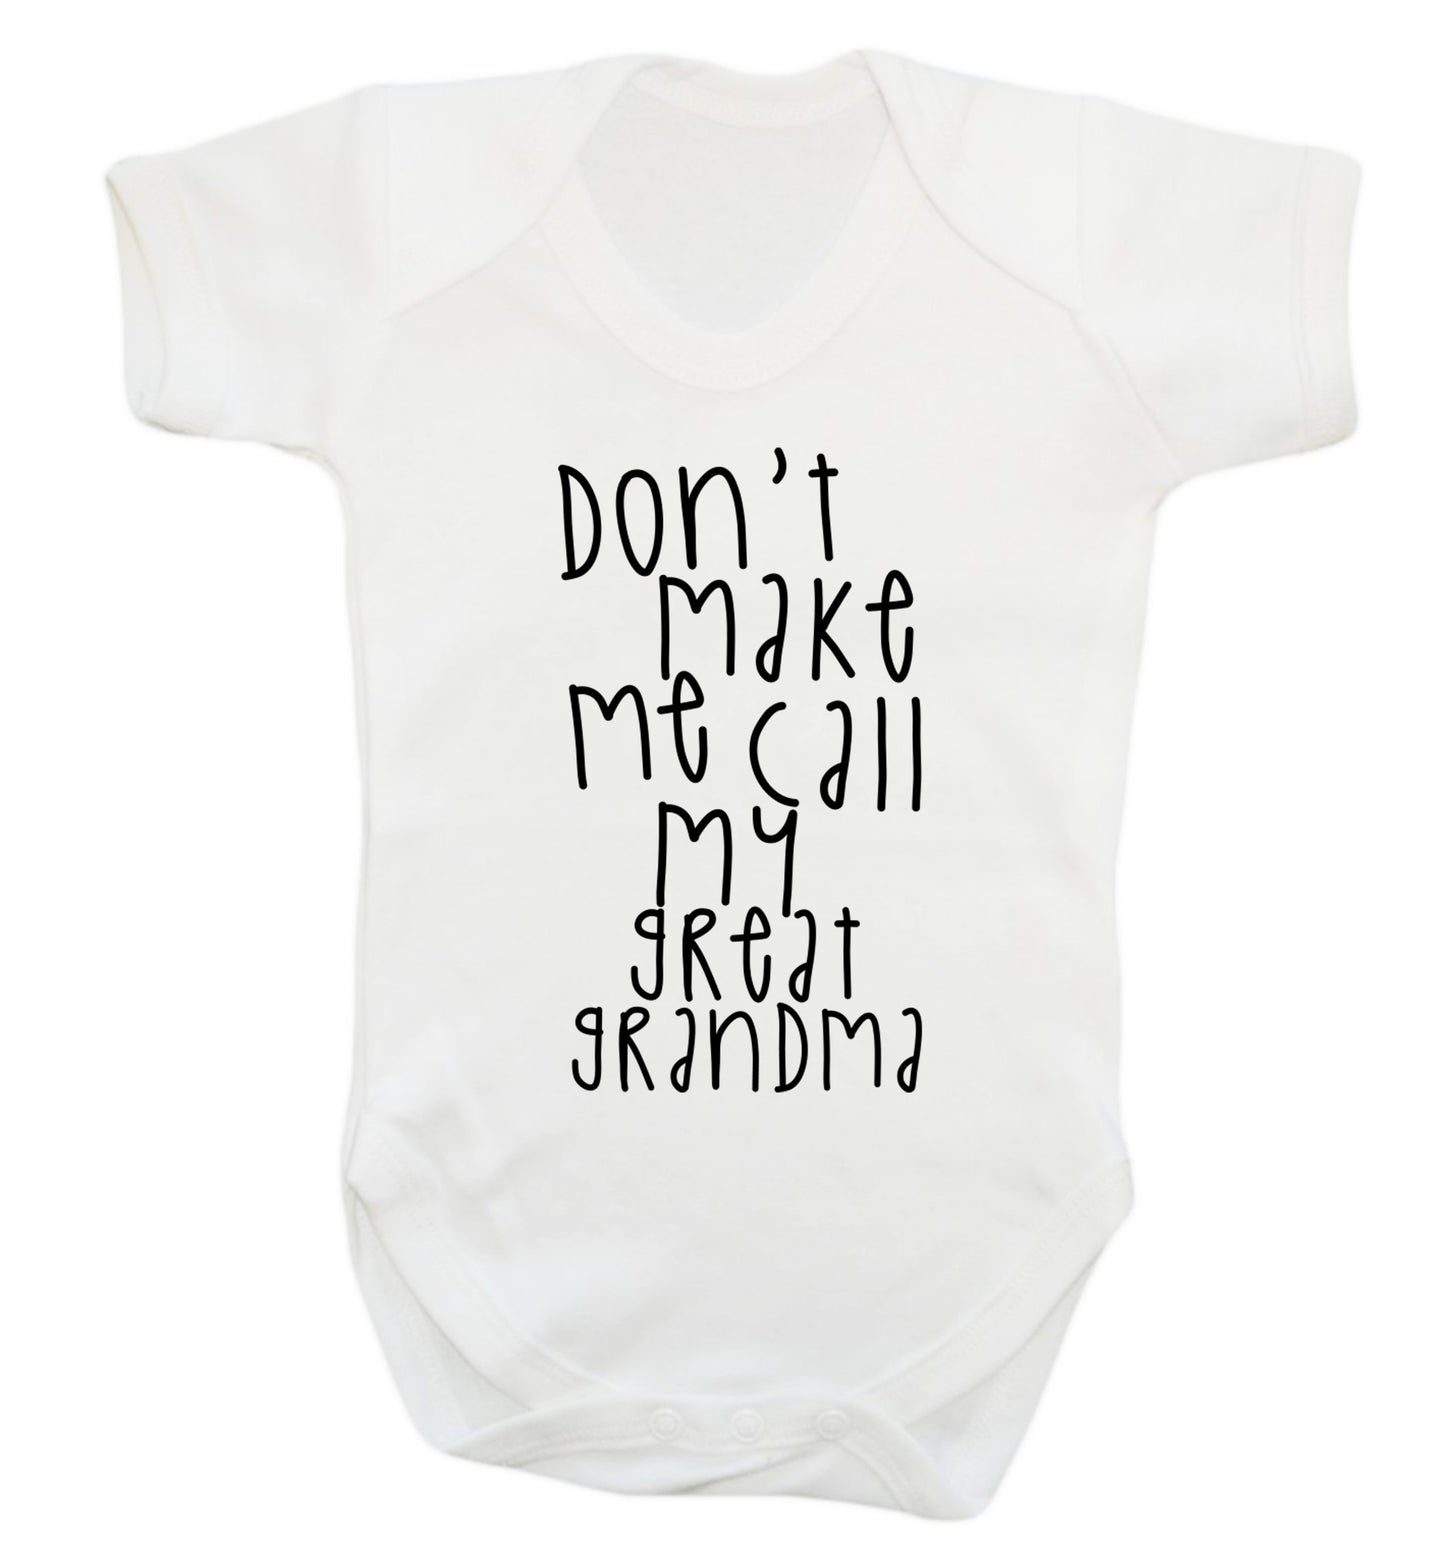 Don't make me call my great grandma Baby Vest white 18-24 months